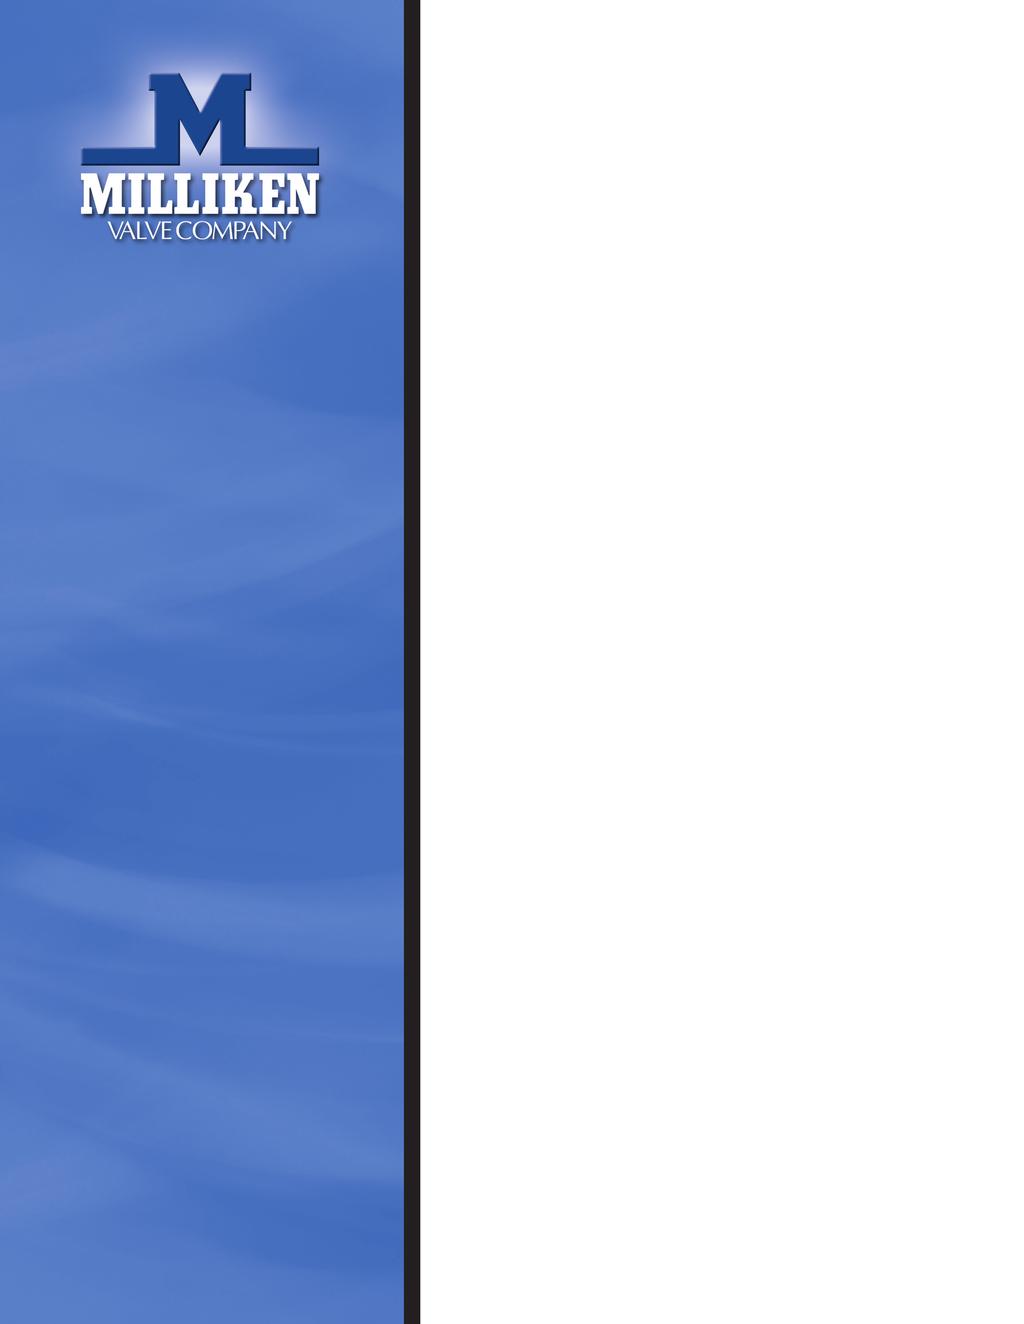 Milliken Valve offers the following for your water and wastewater needs: Eccentric Plug Valves ~ Series 601/600 Flanged & MJ ~ Series 601S Stainless Steel ~ Series 601RL Rubber Lined ~ Series 602